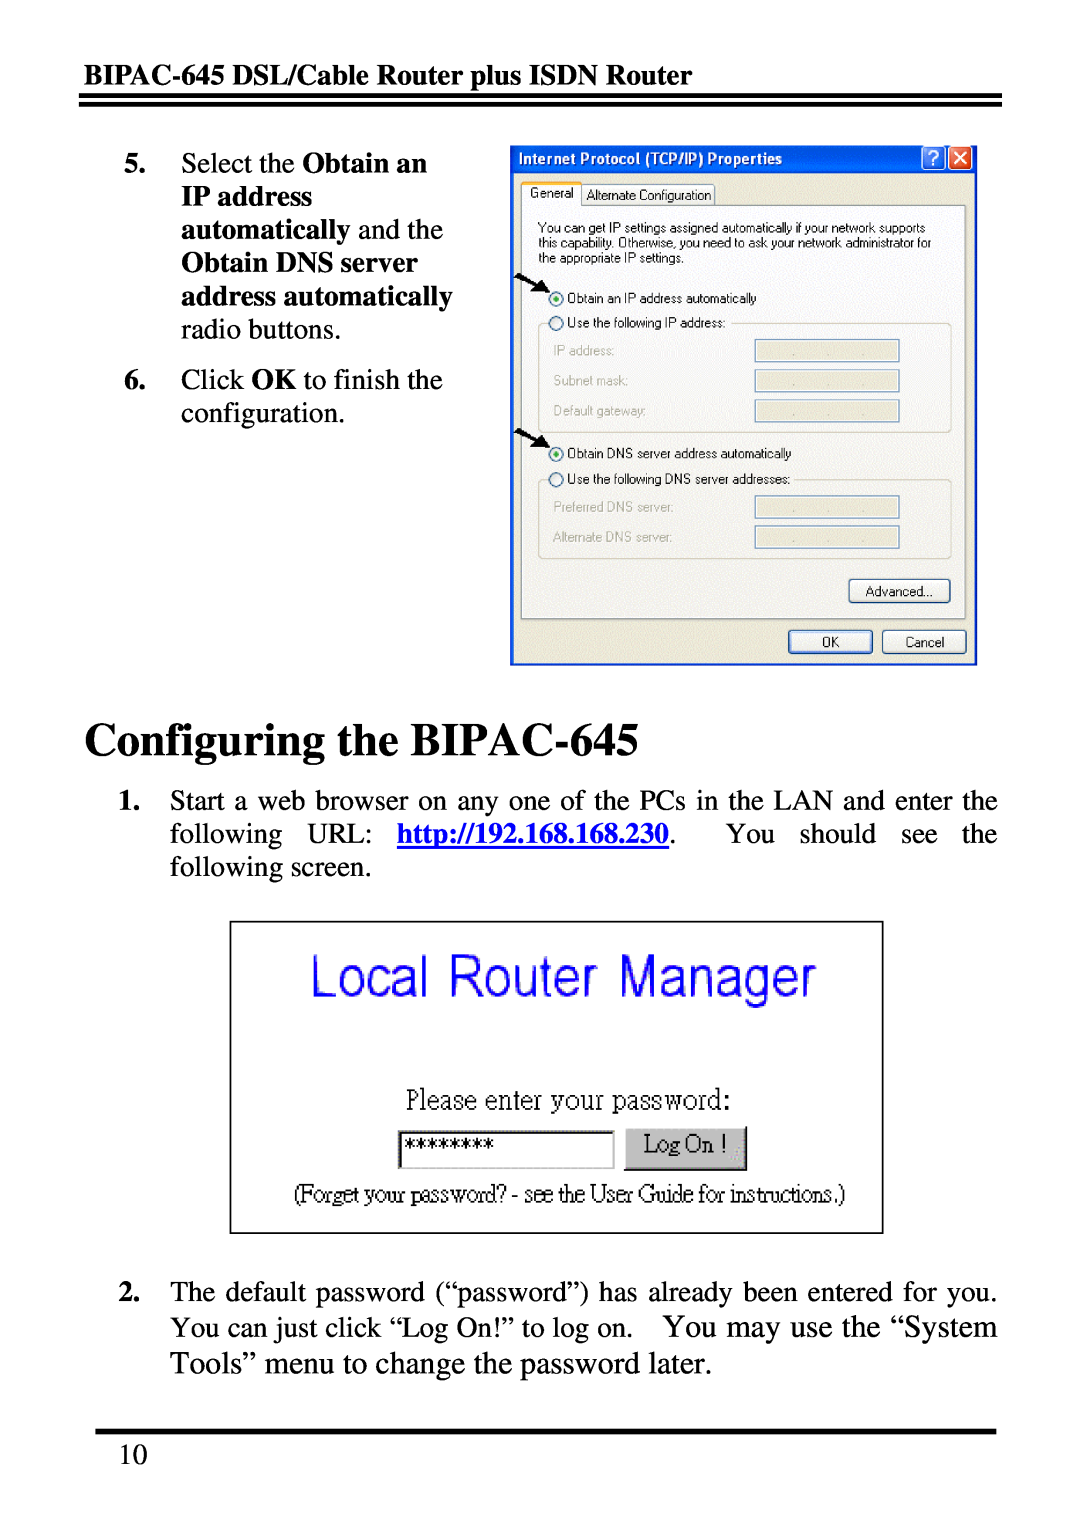 Billion Electric Company quick start Configuring the BIPAC-645, Tools” menu to change the password later 